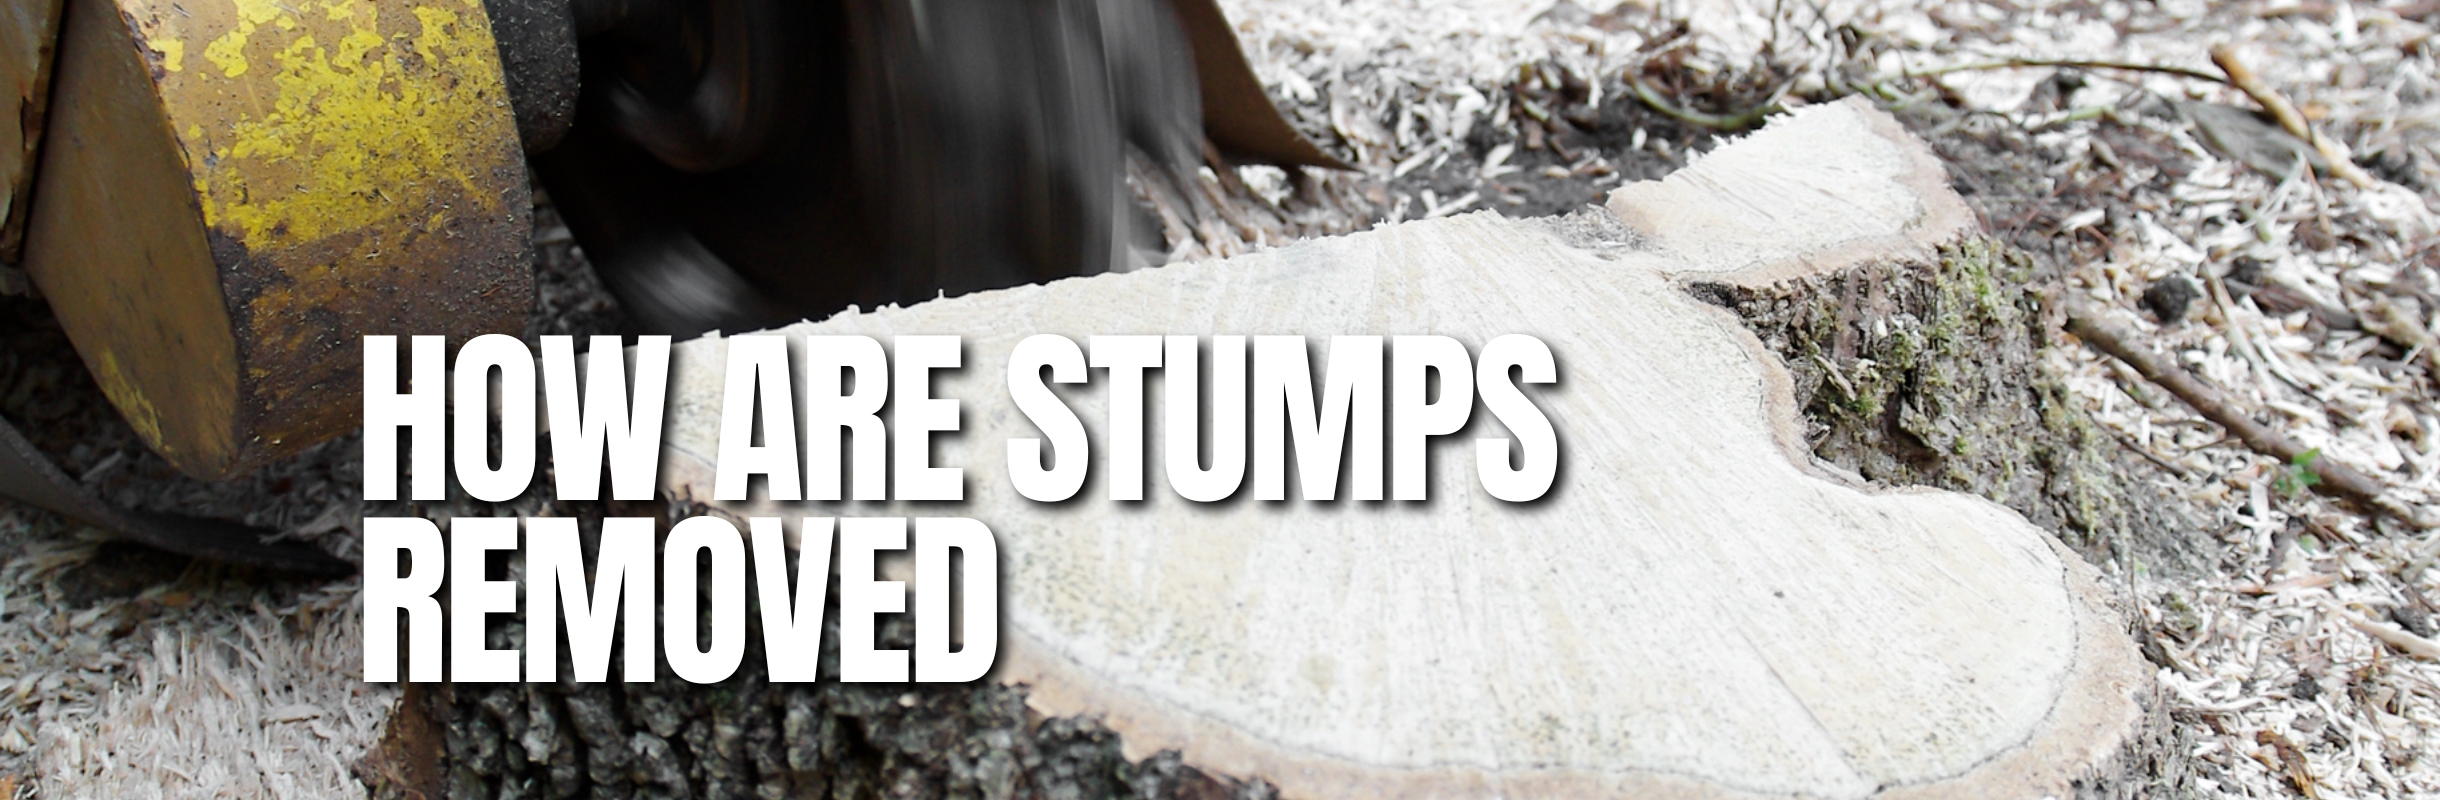 How-Are-Stumps-Removed